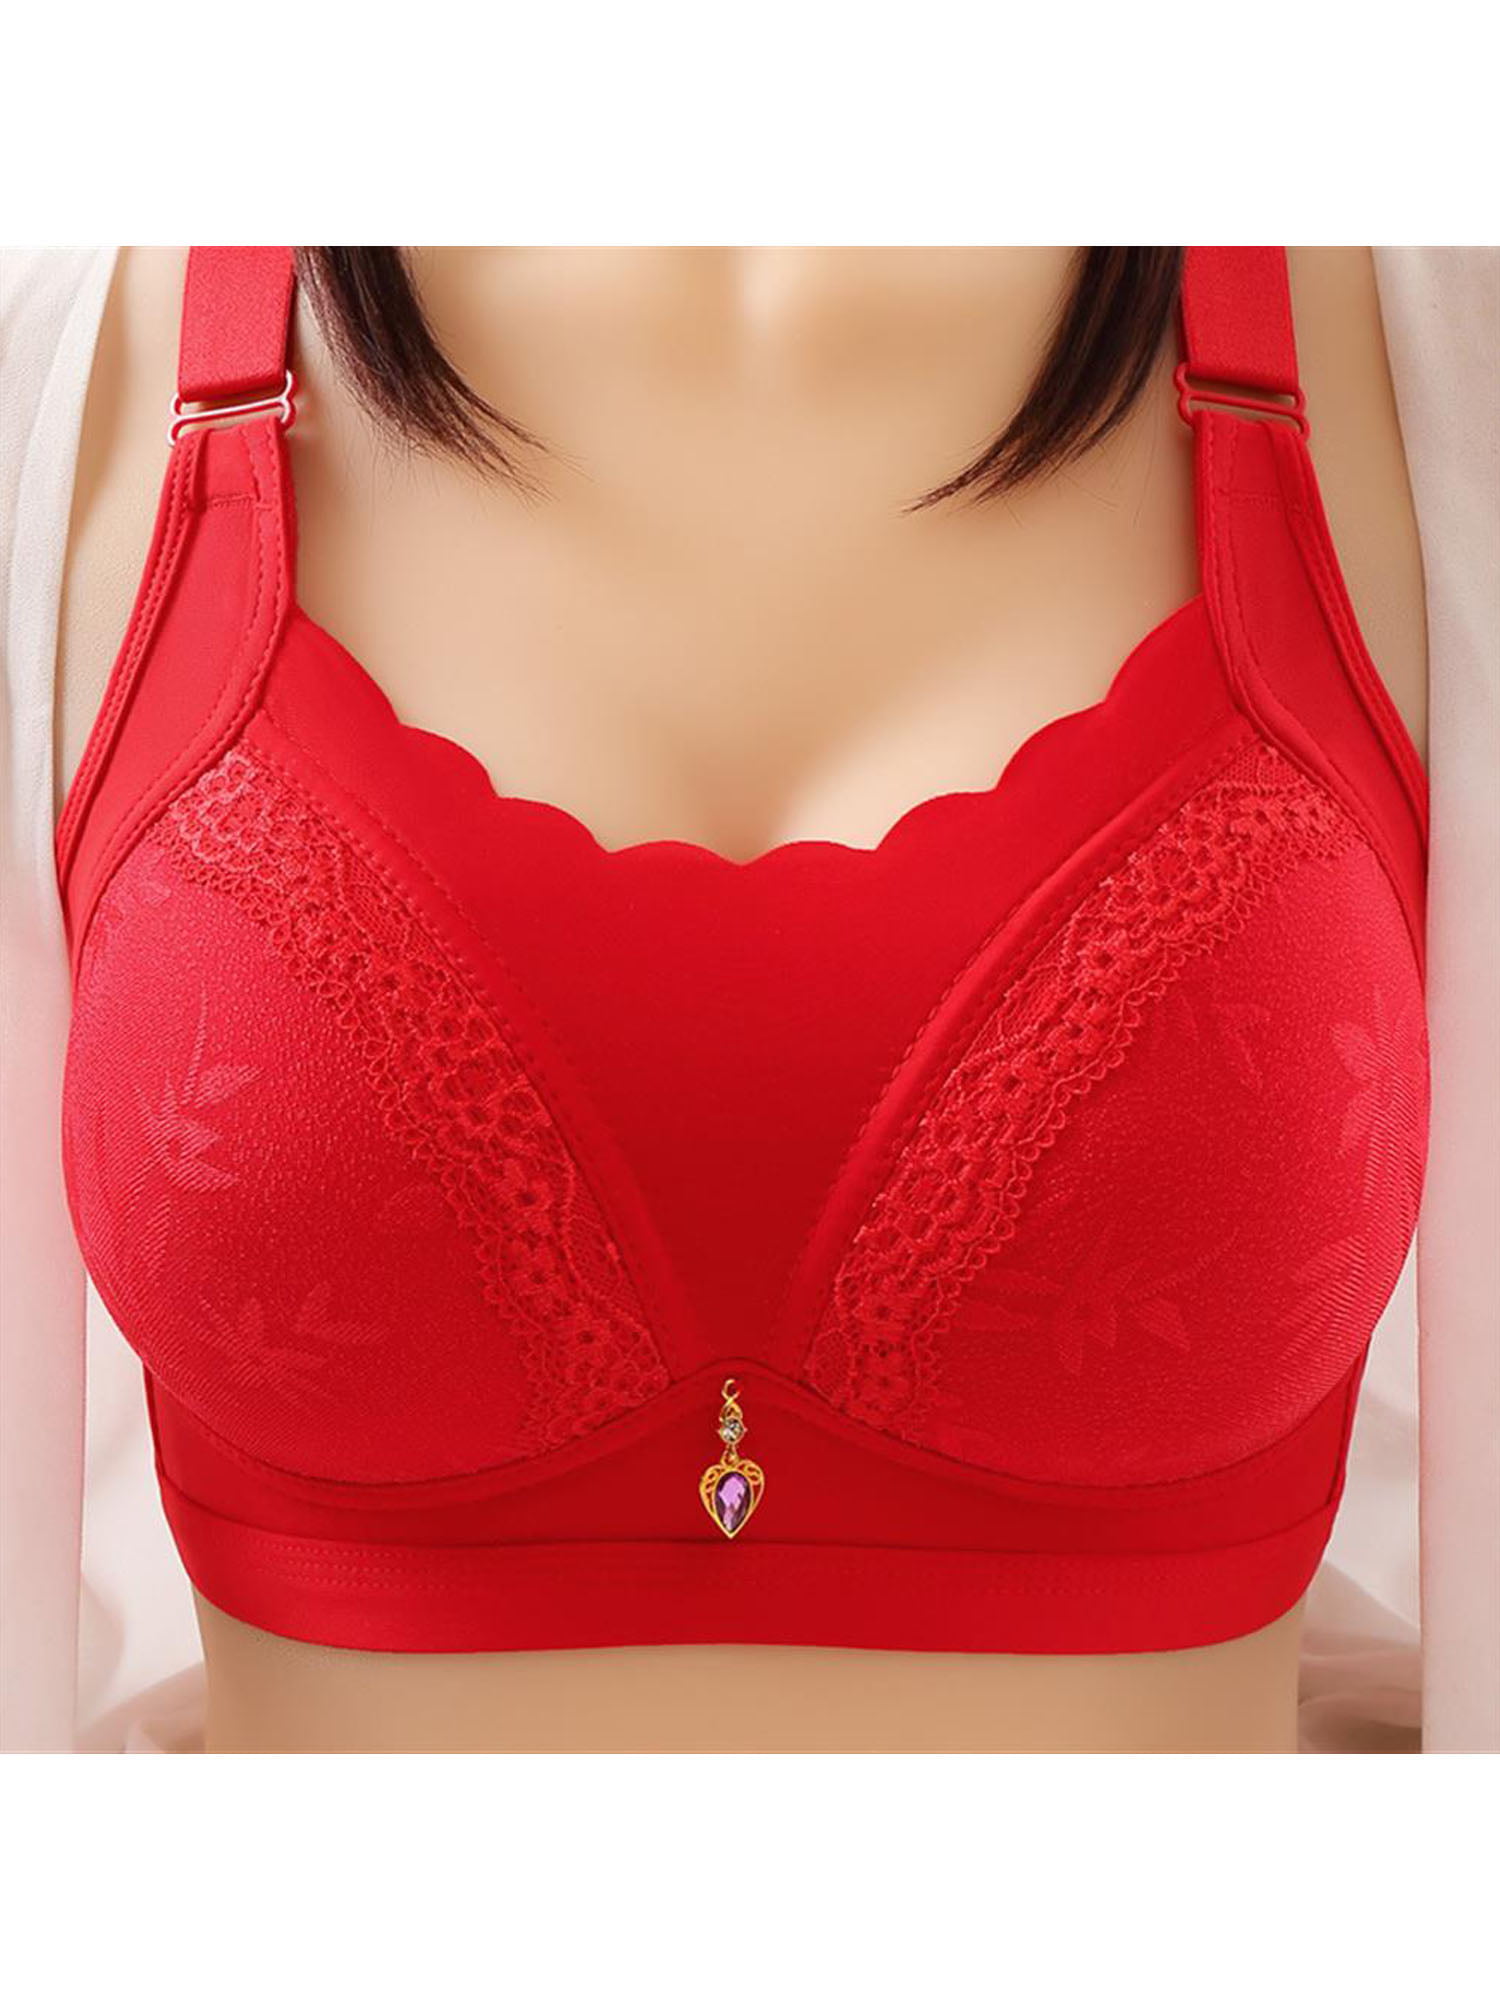 Plus Size Bras for Women Wire-Free Push-Up Seamless Bra Lace C 38/85